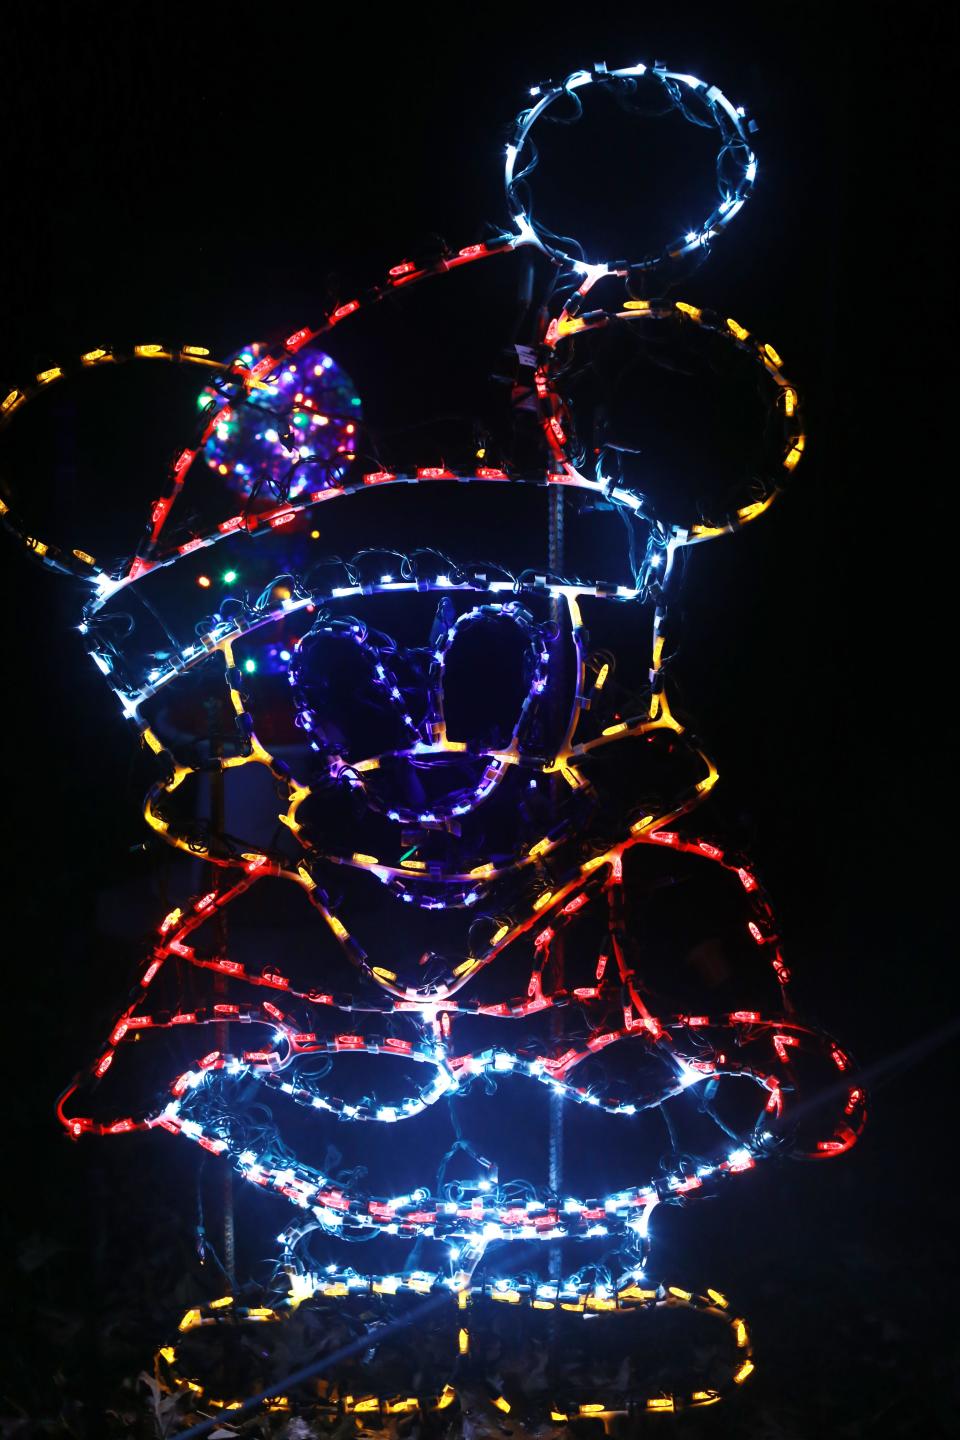 Mickey Mouse, Santa Claus and Snoopy as the Red Baron are just a few of the popular characters appearing in the Crazy Tech Christmas Animated Light Show.